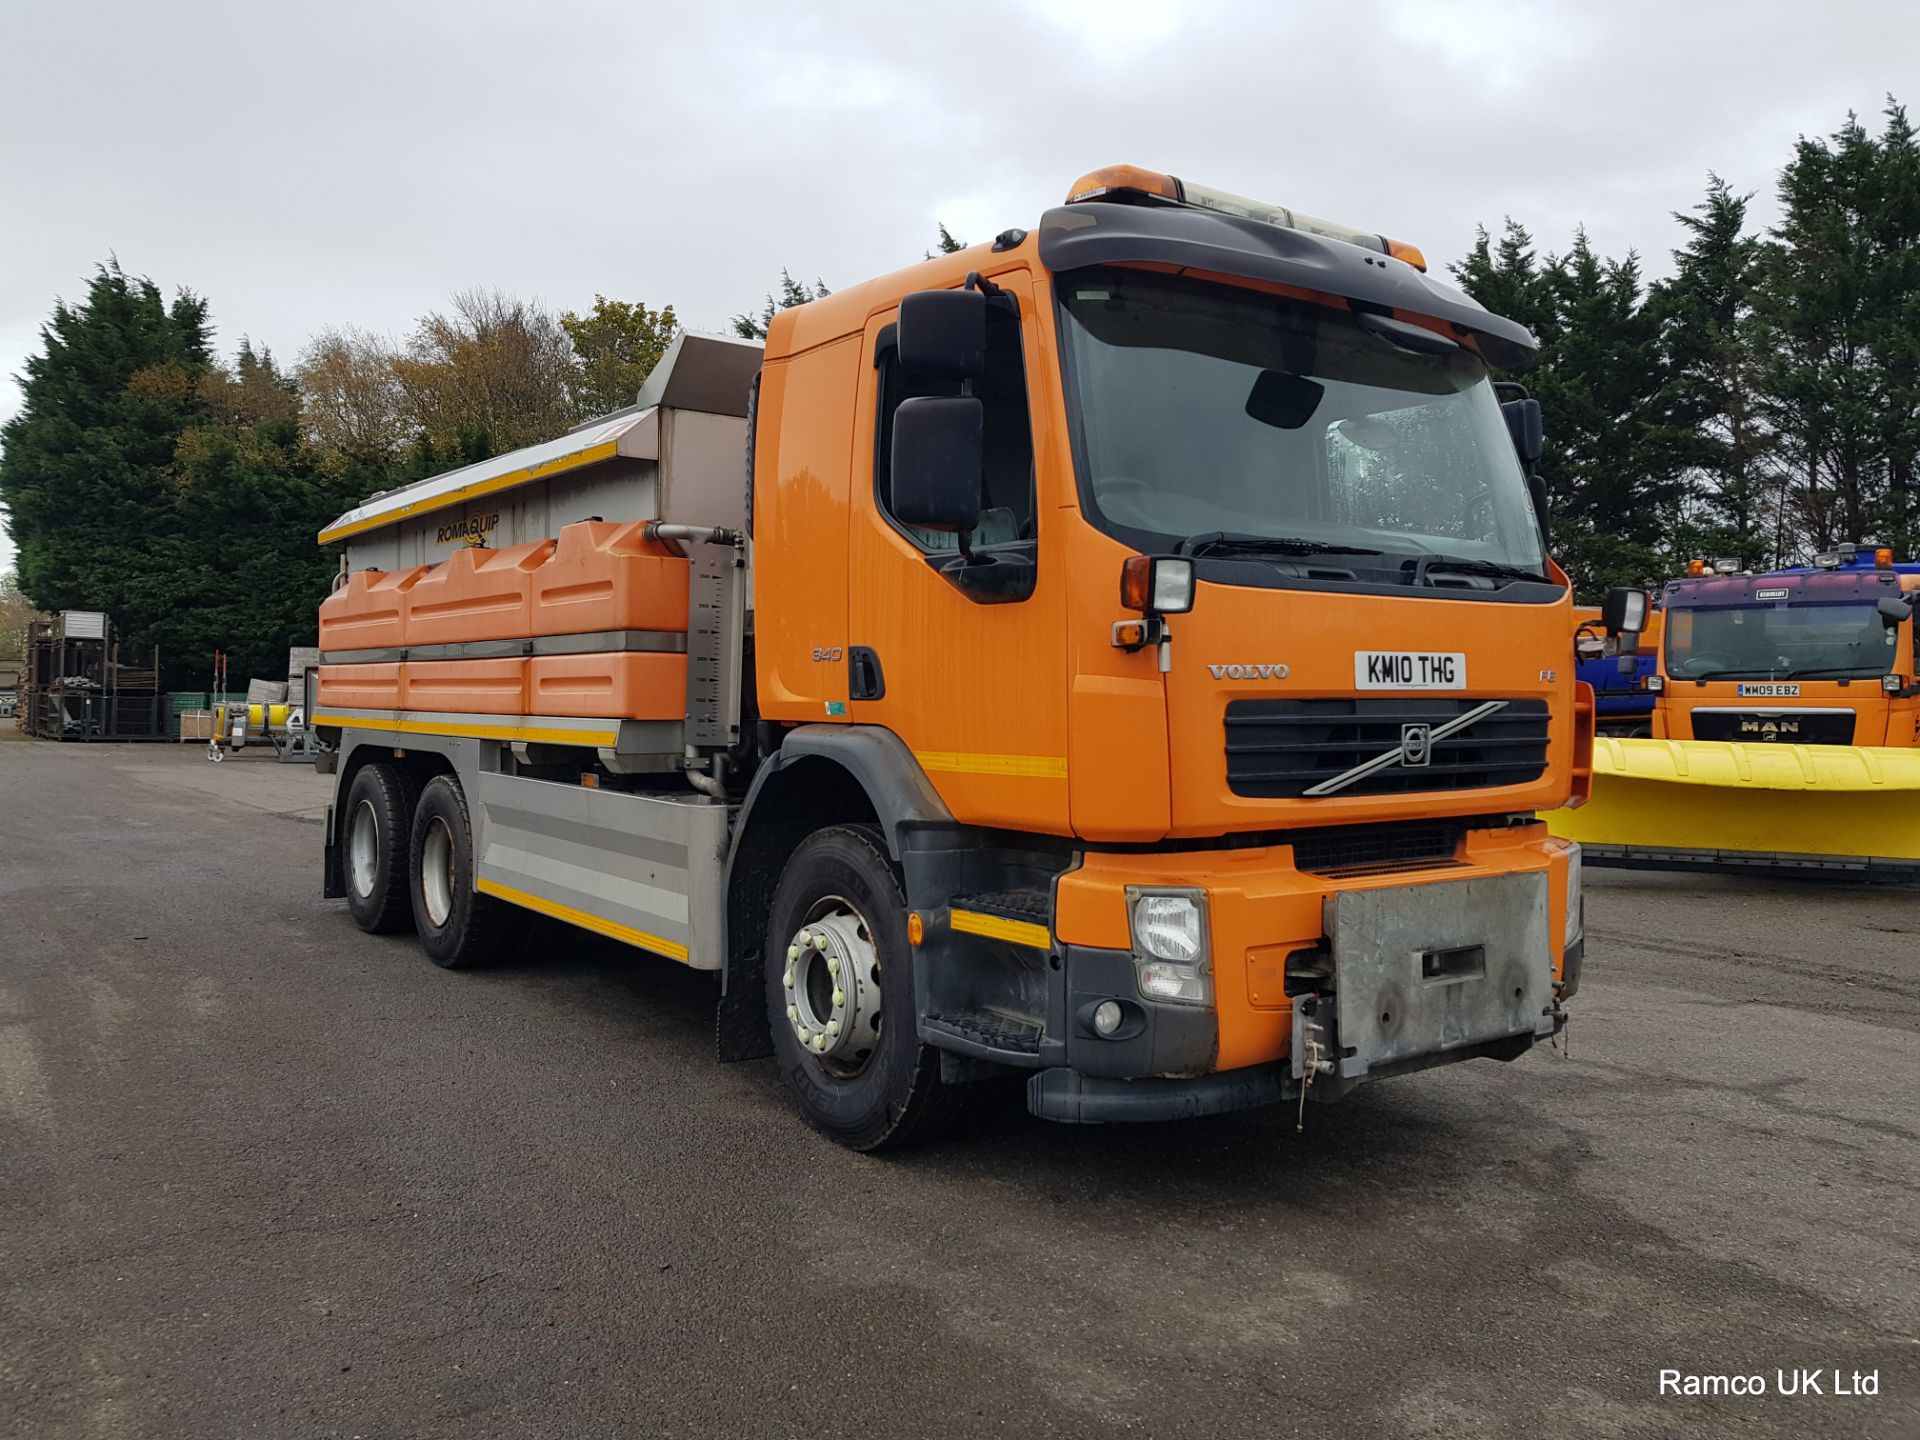 2010 (reg KM10 THG) Volvo FE 340 with Romaquip pre-wet gritter mount. - Image 3 of 17